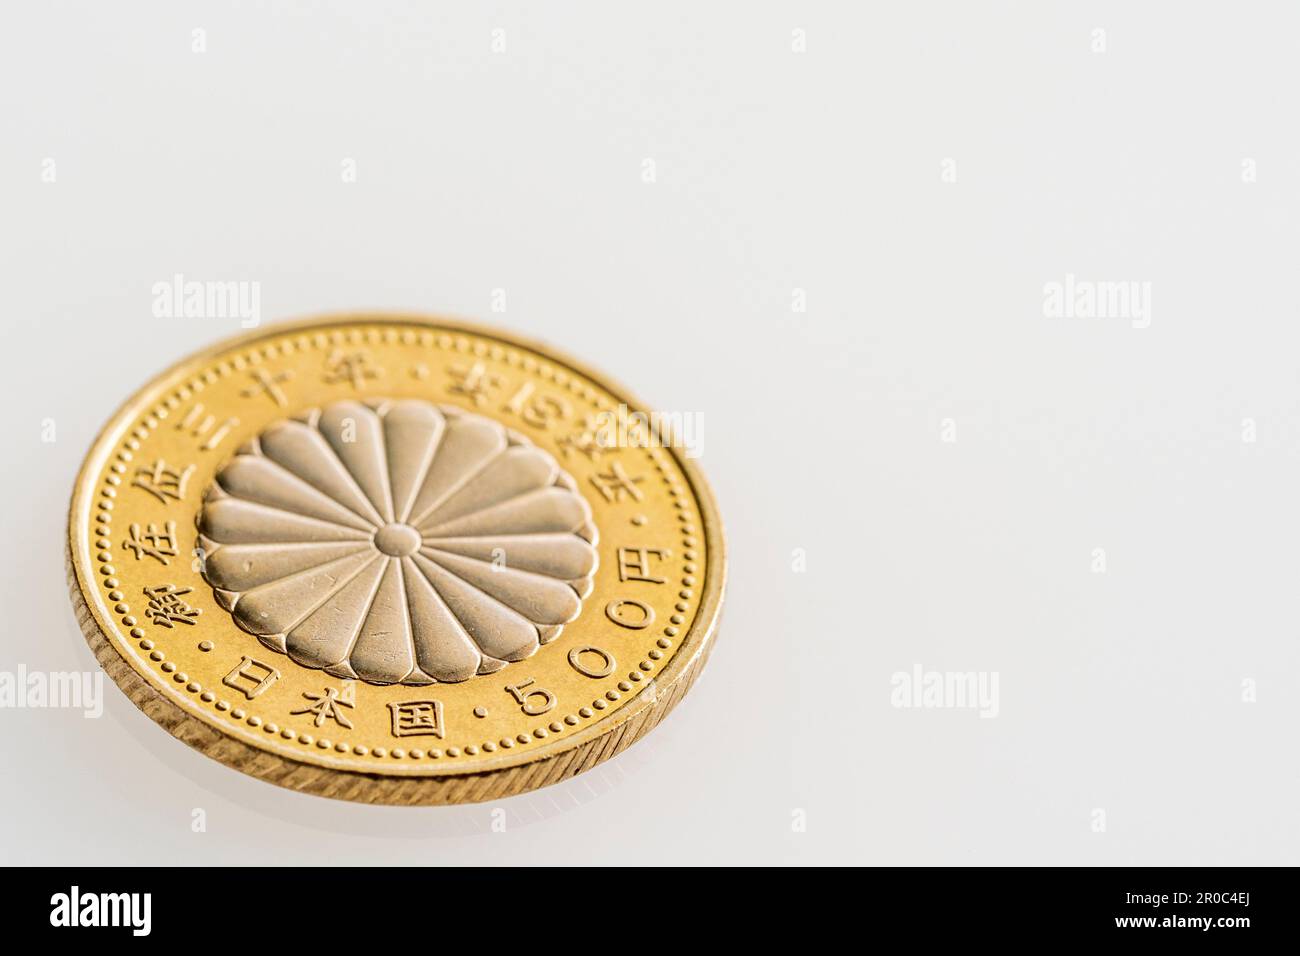 Japanese commemorative 500 yen coin issued in 2019, Heisei 31, to celebrate the 30th anniversary of the enthronement of the Emperor. Stock Photo